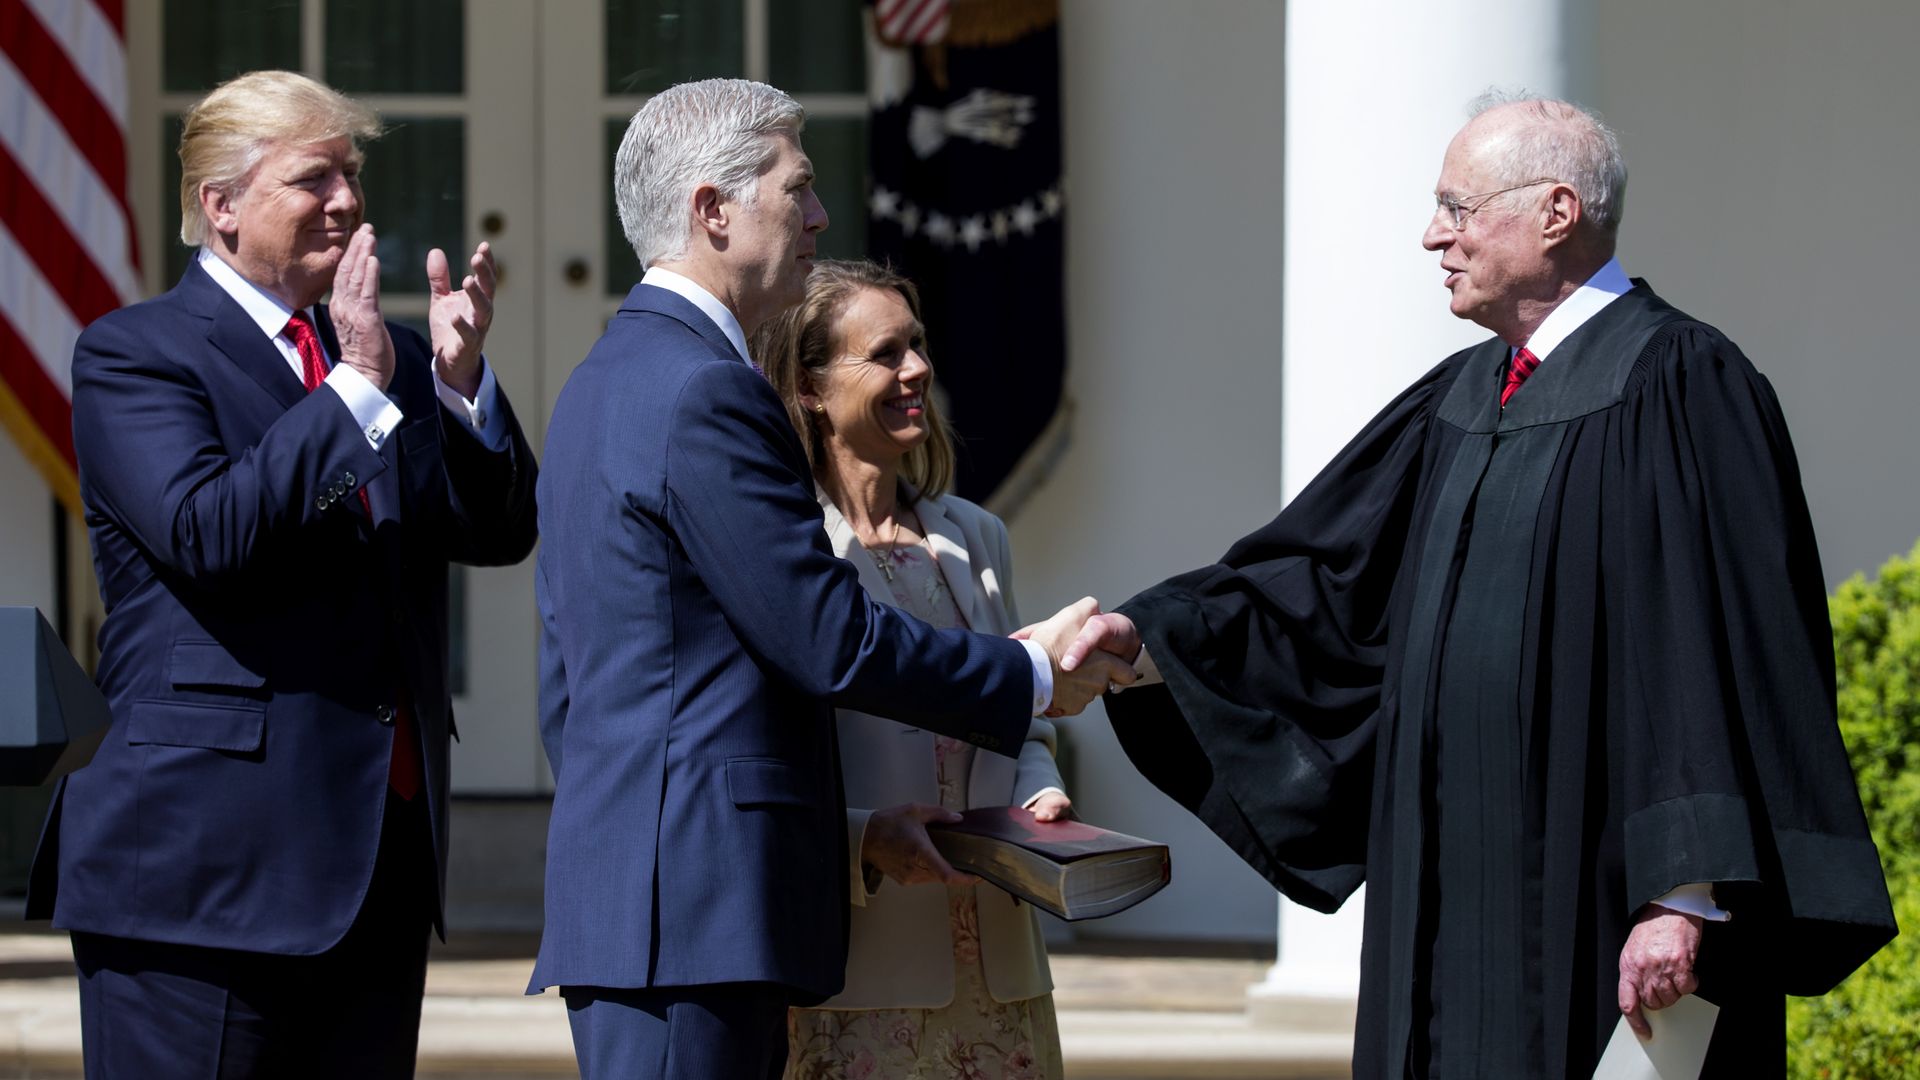 President Trump, Neil Gorsuch and Anthony Kennedy